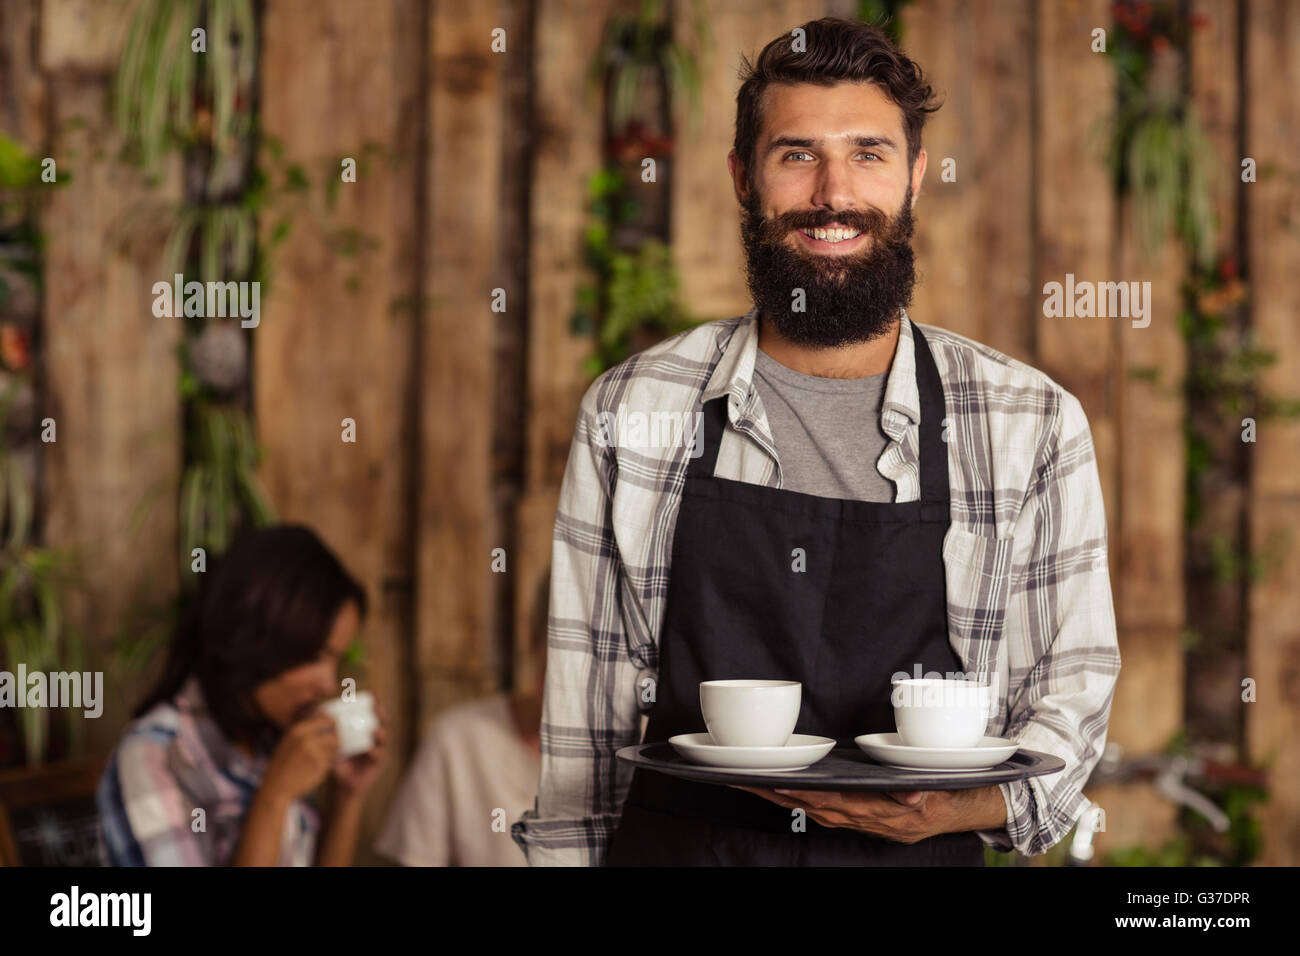 Waiter holding a tray with coffees Stock Photo